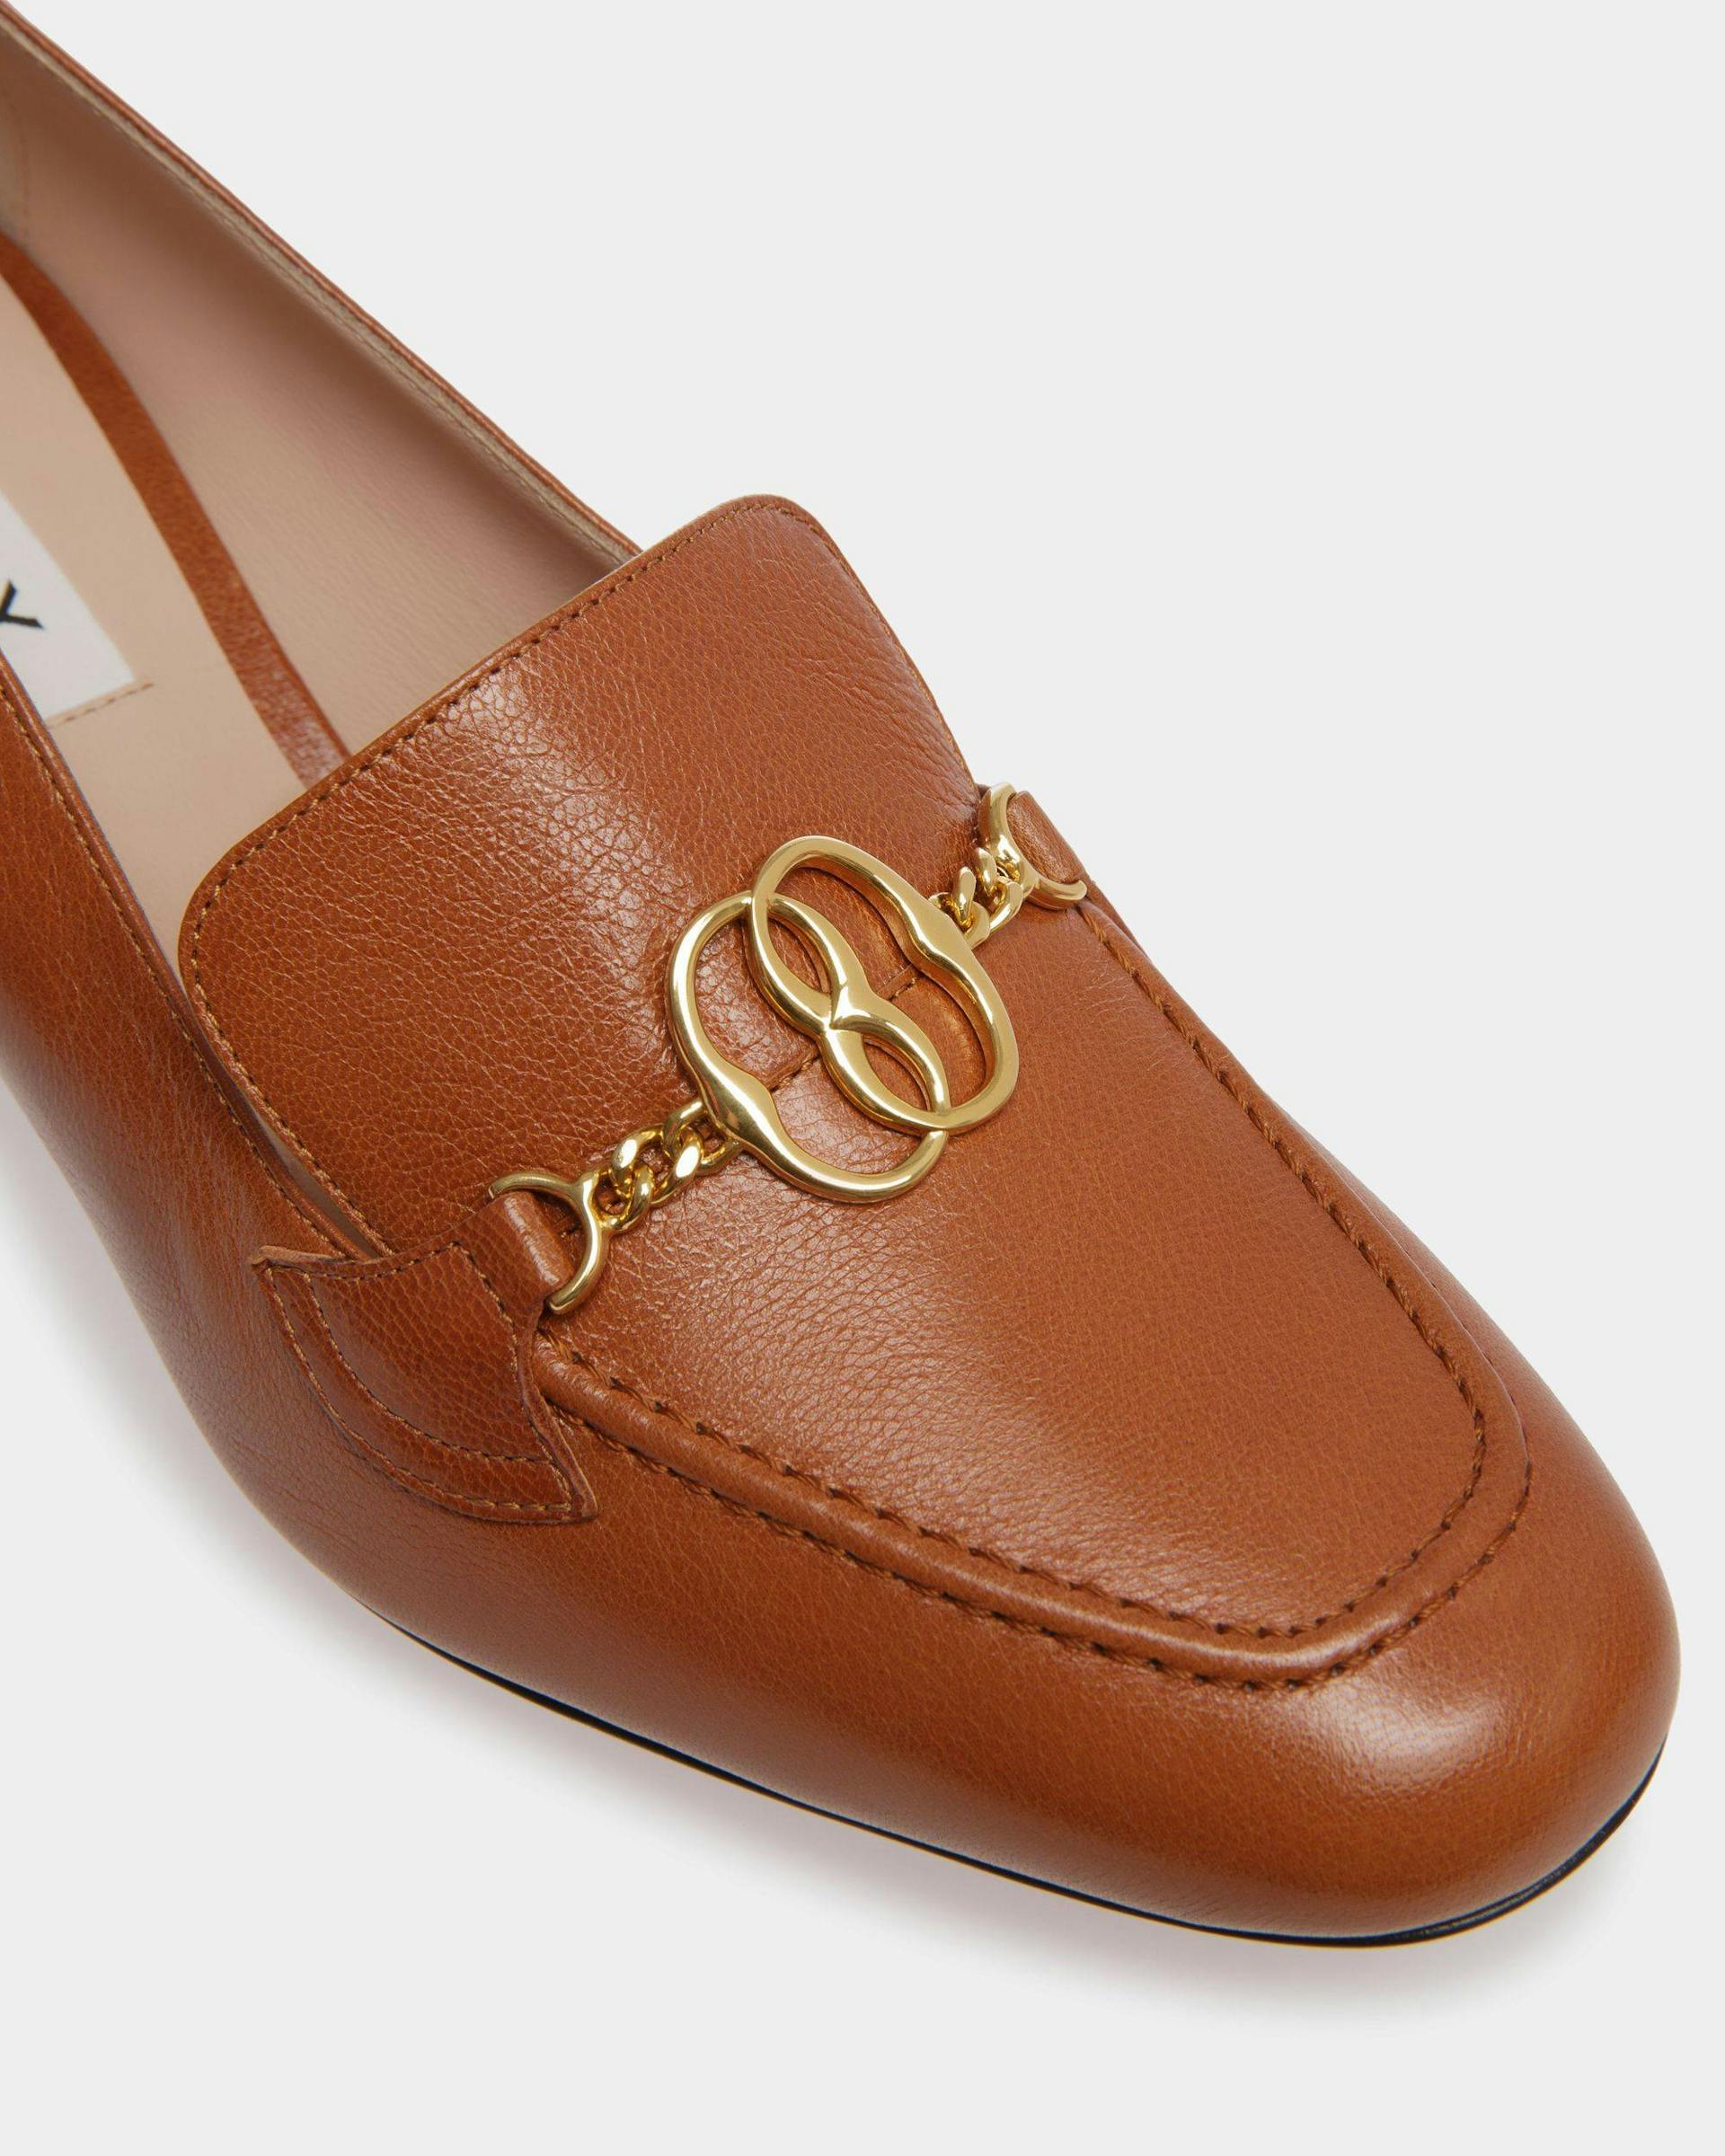 Emblem Pumps In Brown Leather - Women's - Bally - 05